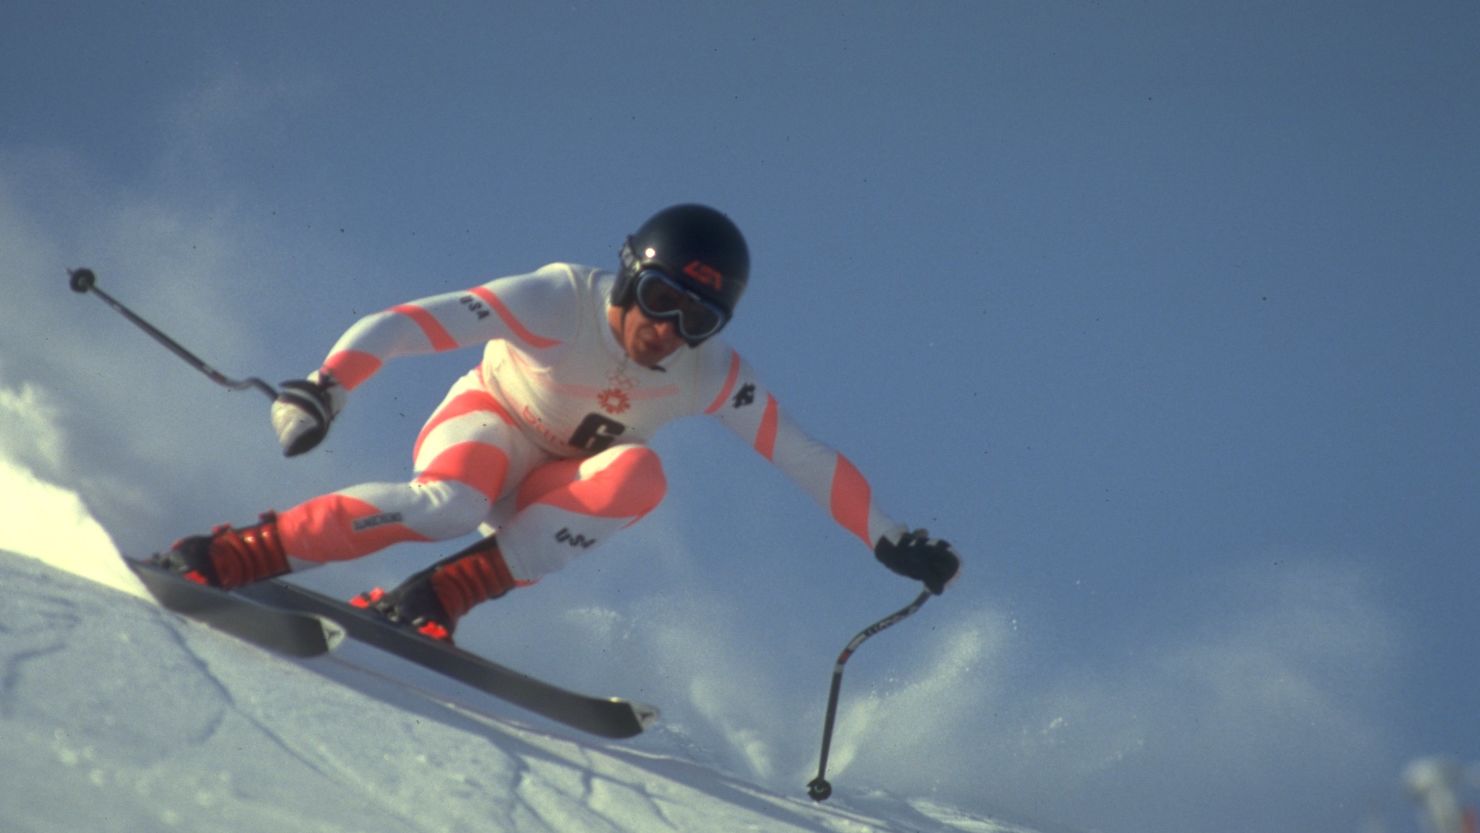 Bill Johnson in action at the 1984 Winter Olympics in Sarajevo.